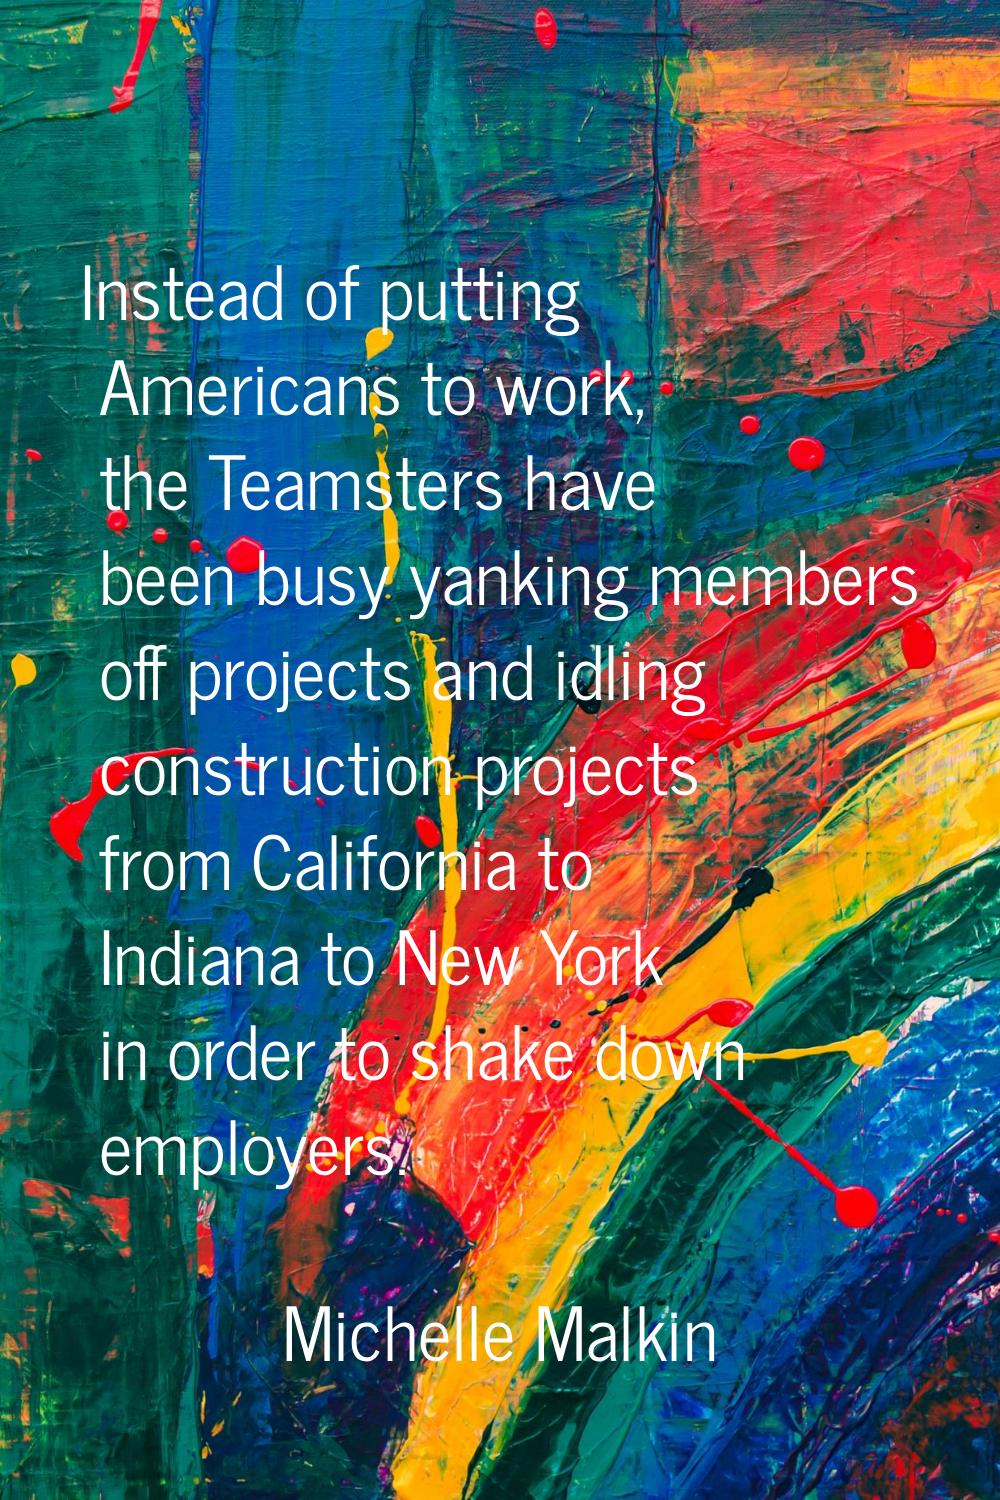 Instead of putting Americans to work, the Teamsters have been busy yanking members off projects and